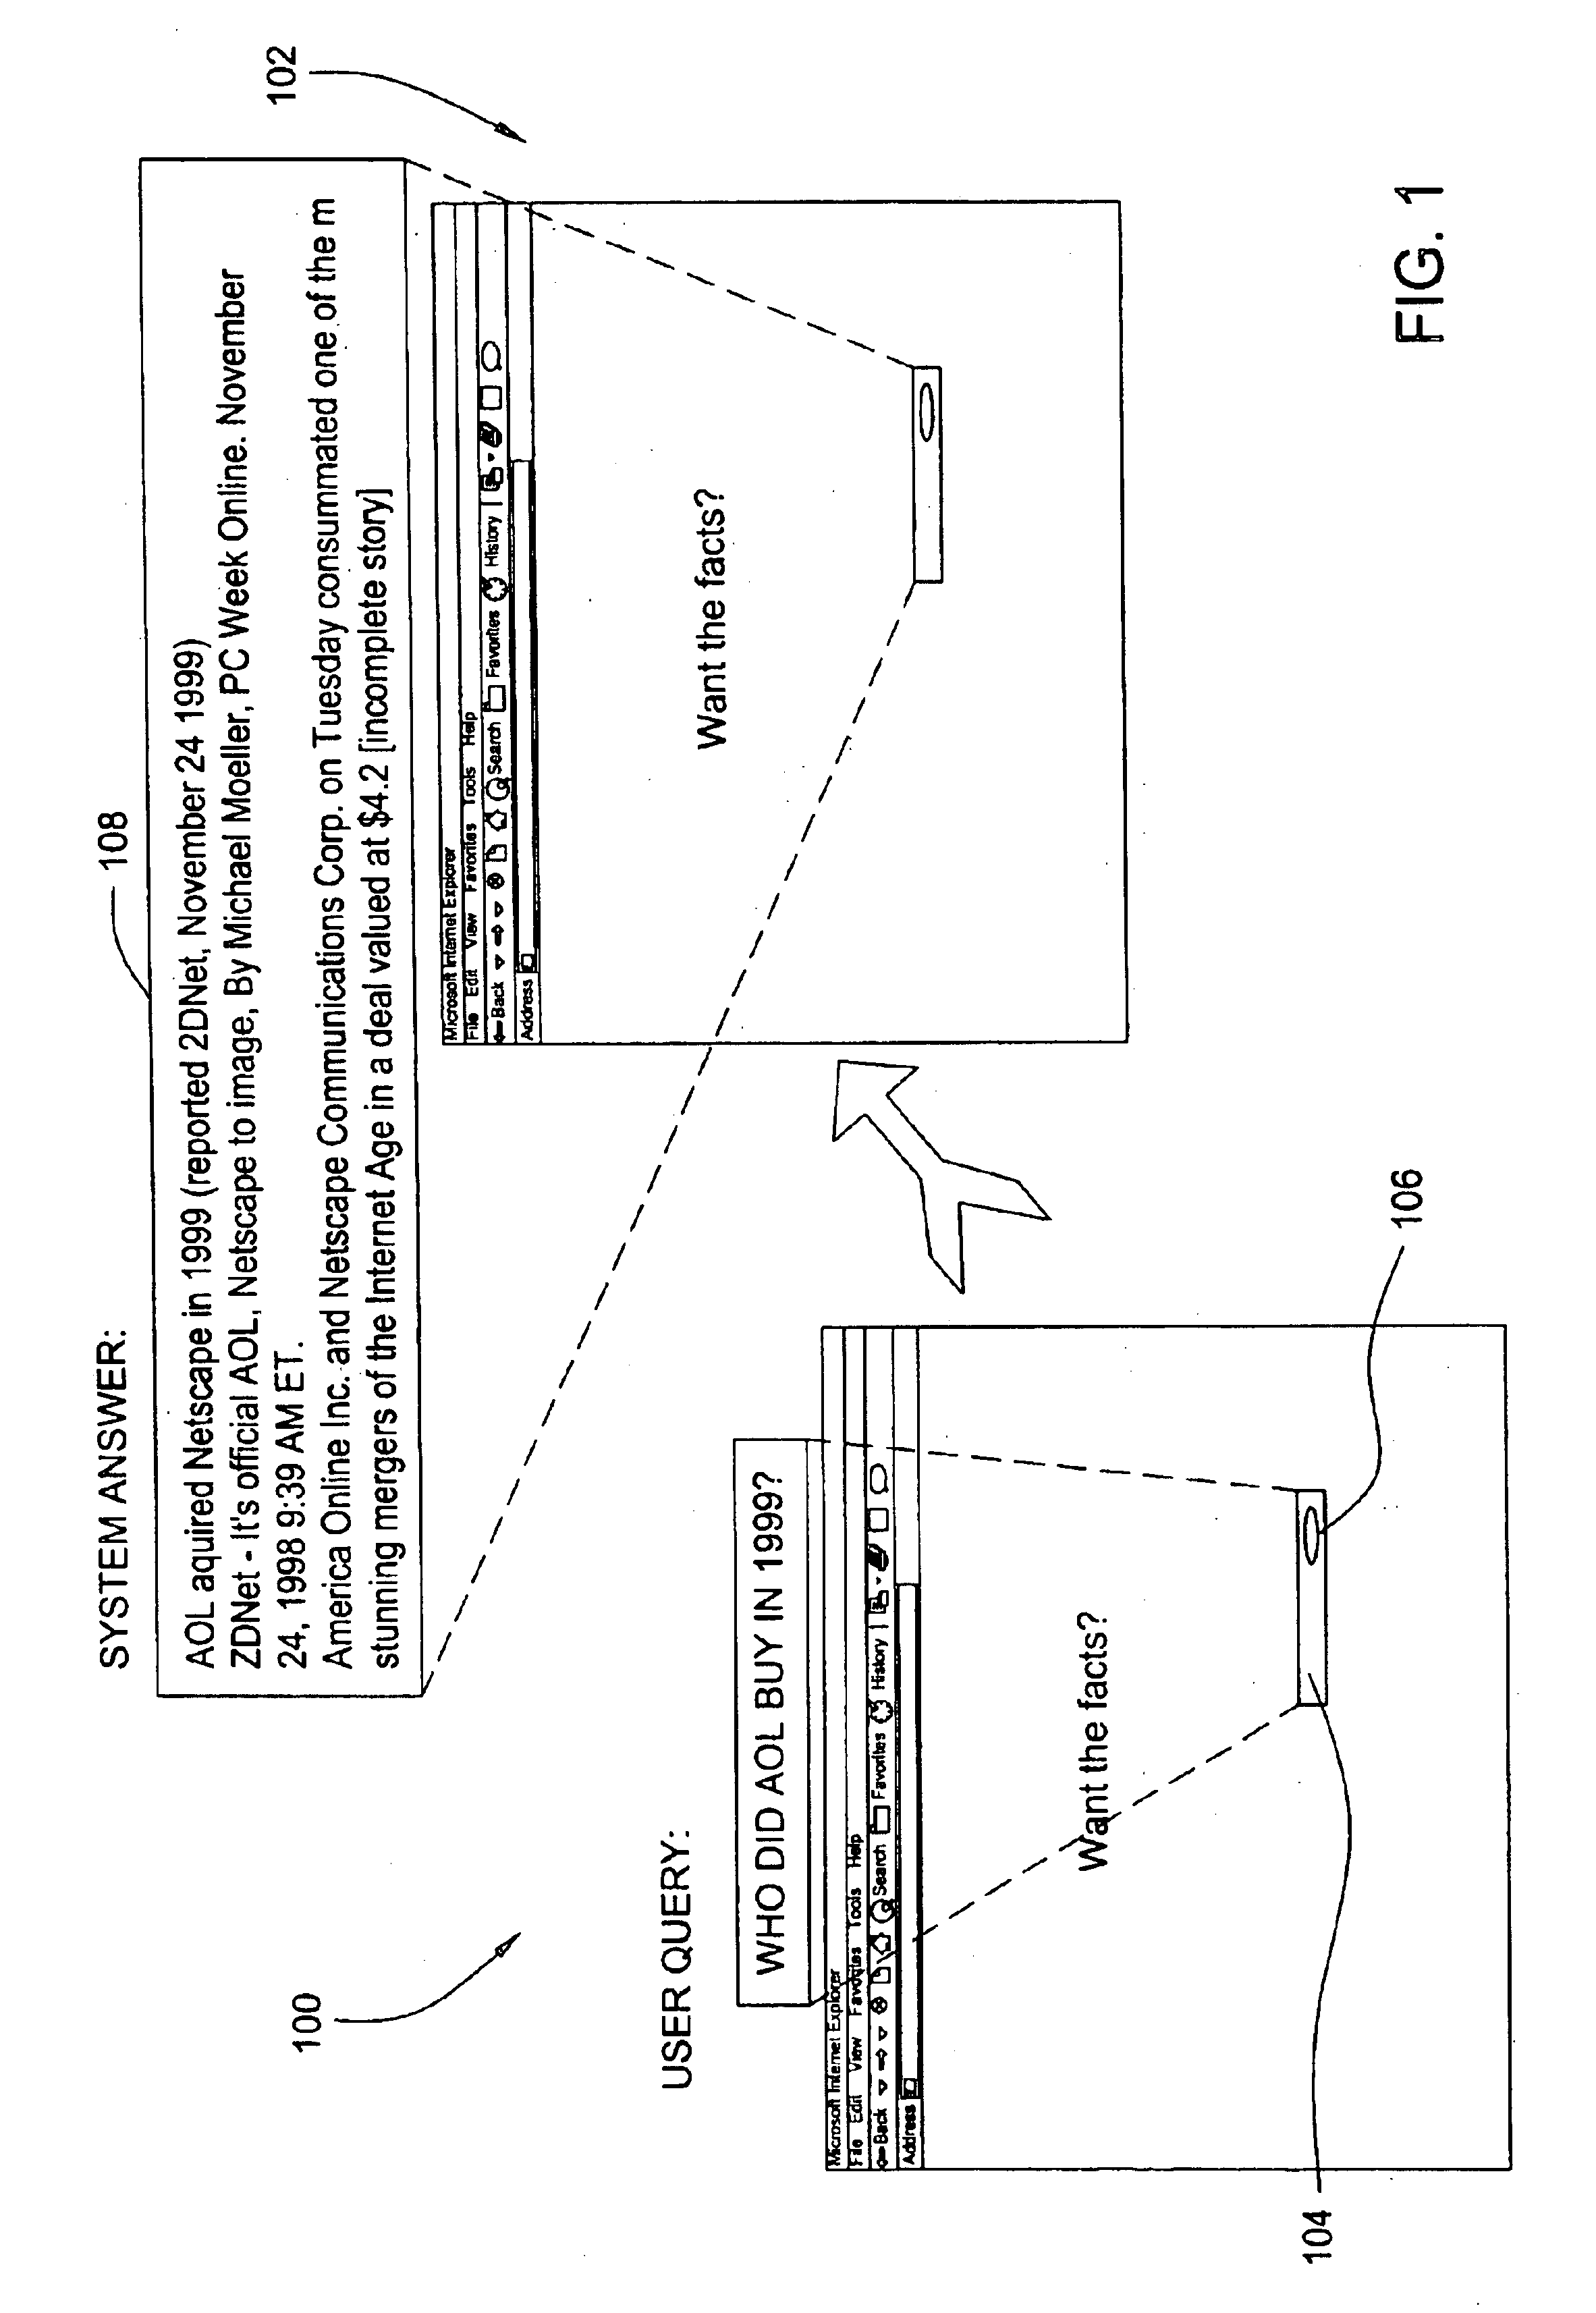 System and method for incorporating concept-based retrieval within boolean search engines